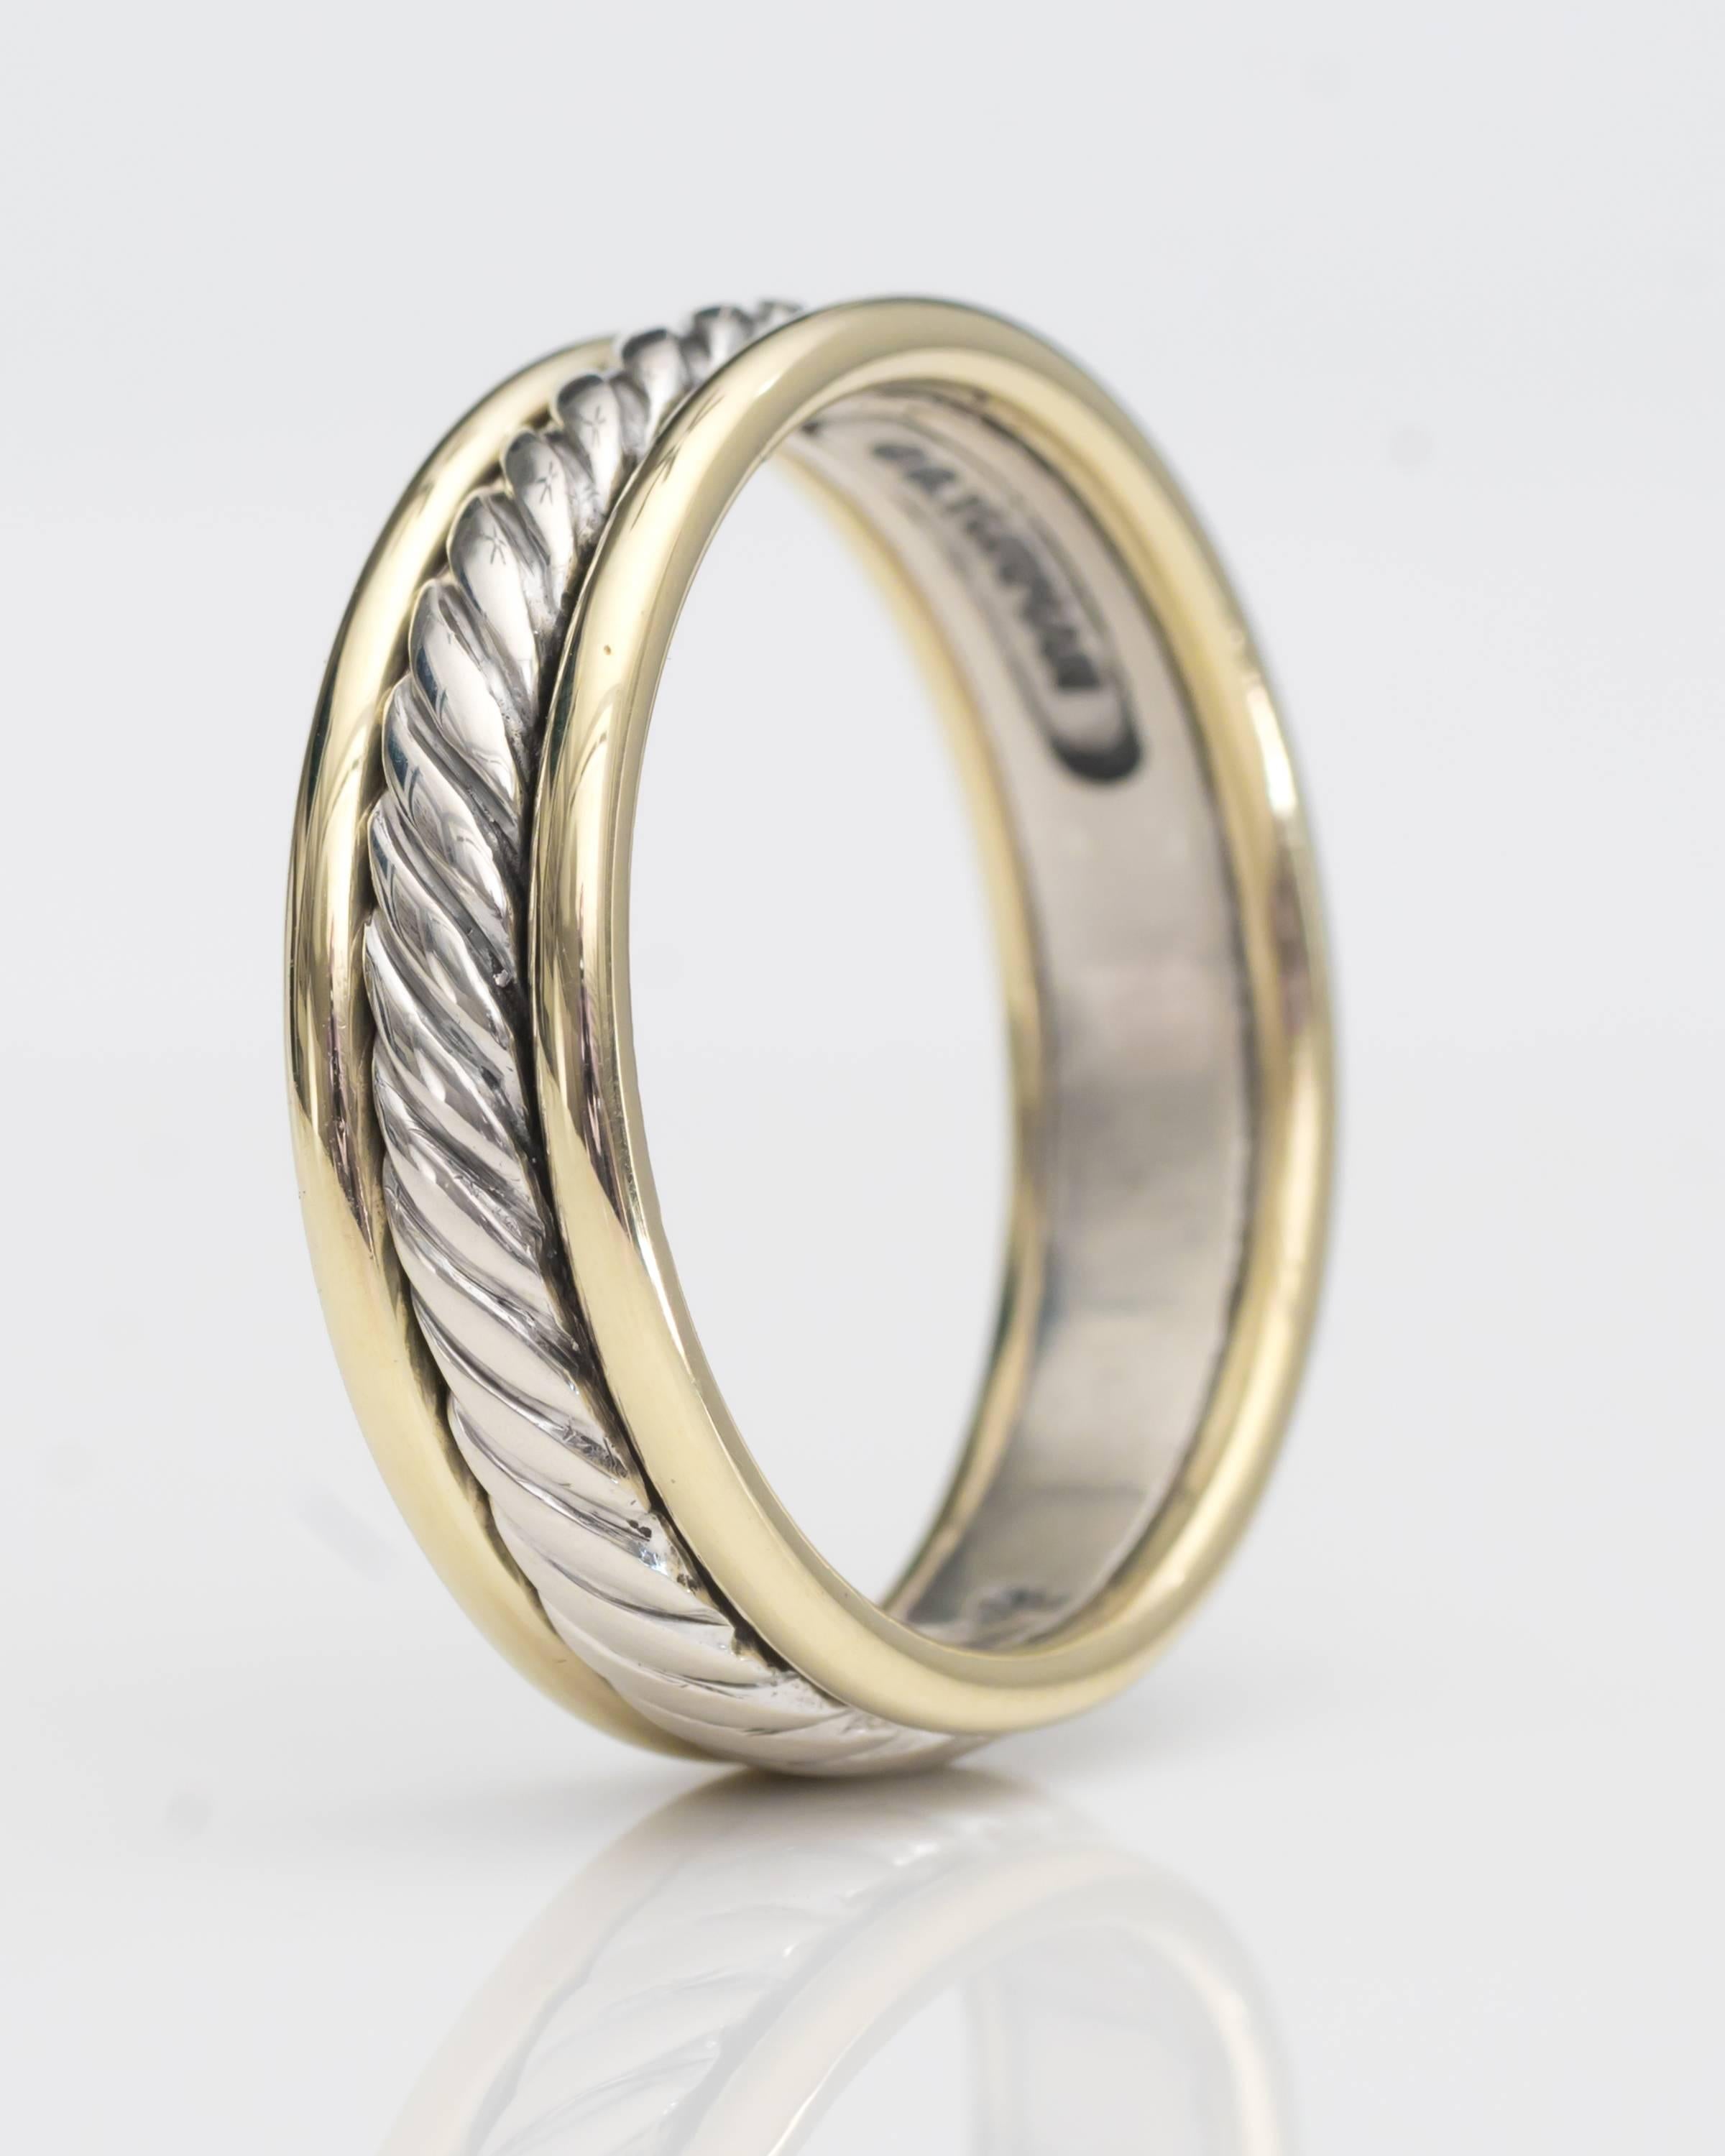 Women's or Men's David Yurman Cable Wedding Bands in 14 Karat Gold, Sterling Silver, Set of Two